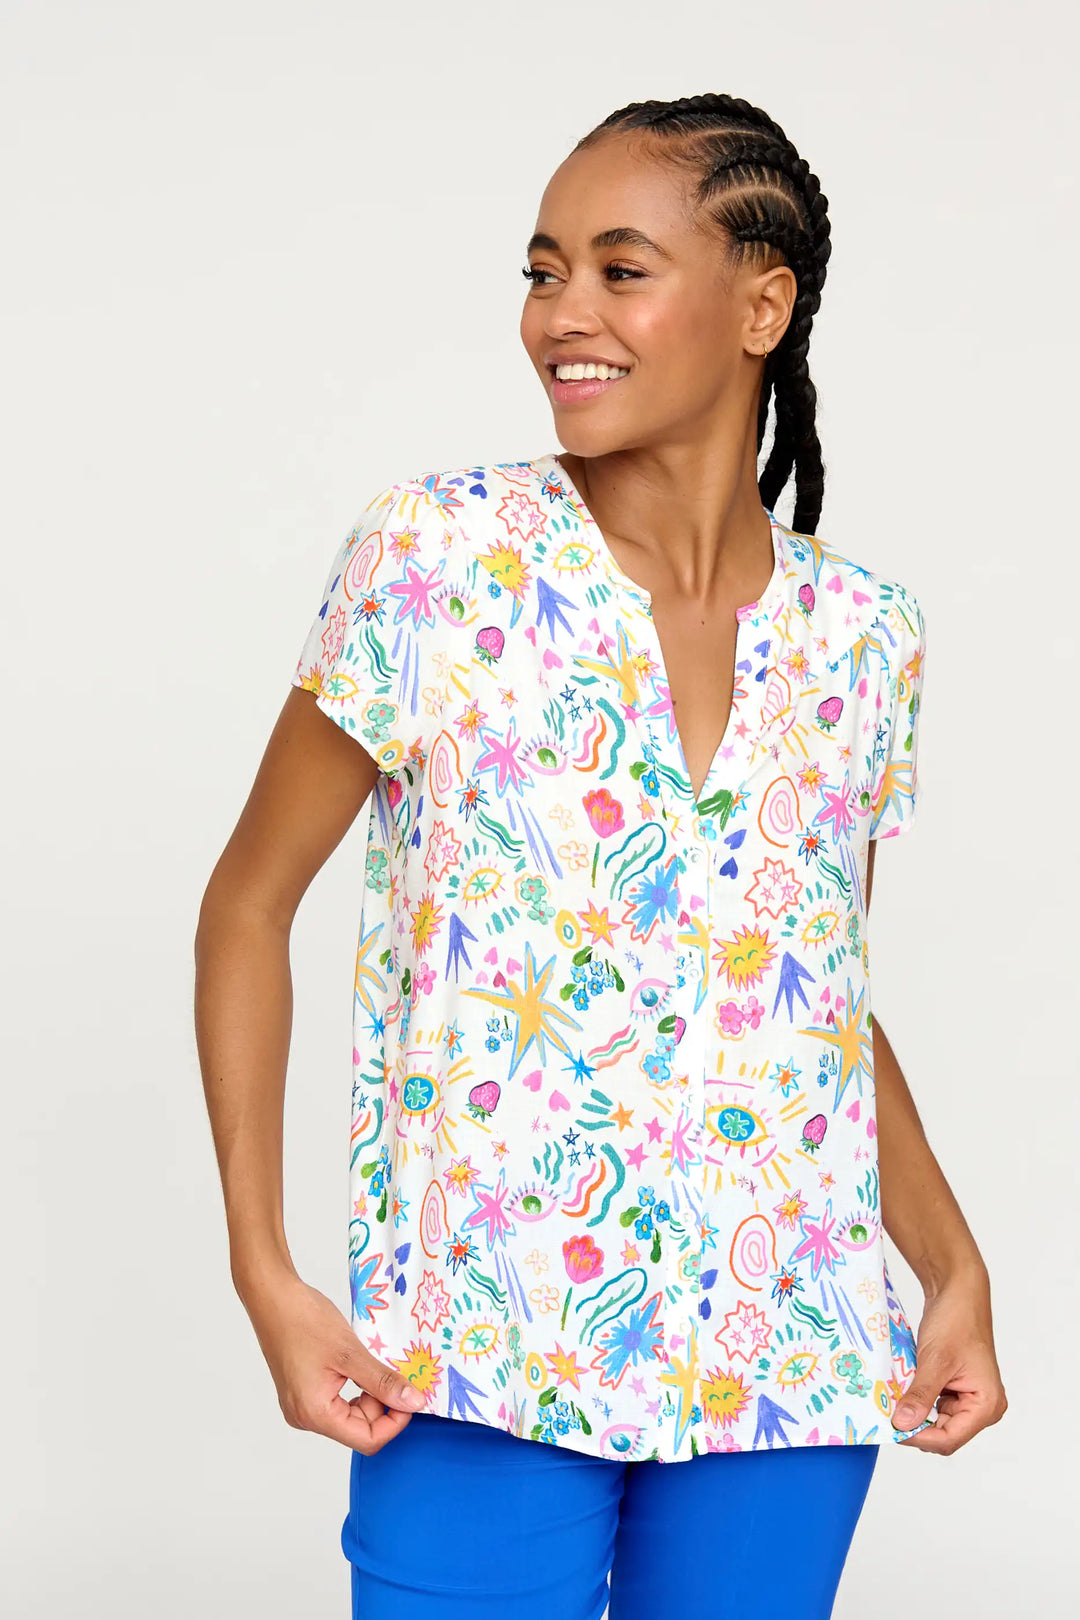 A cheerful model wearing the 'Zali24' style top, adorned with a colourful, playful print of flowers and celestial doodles, featuring a V-neckline and cap sleeves against a light backdrop.